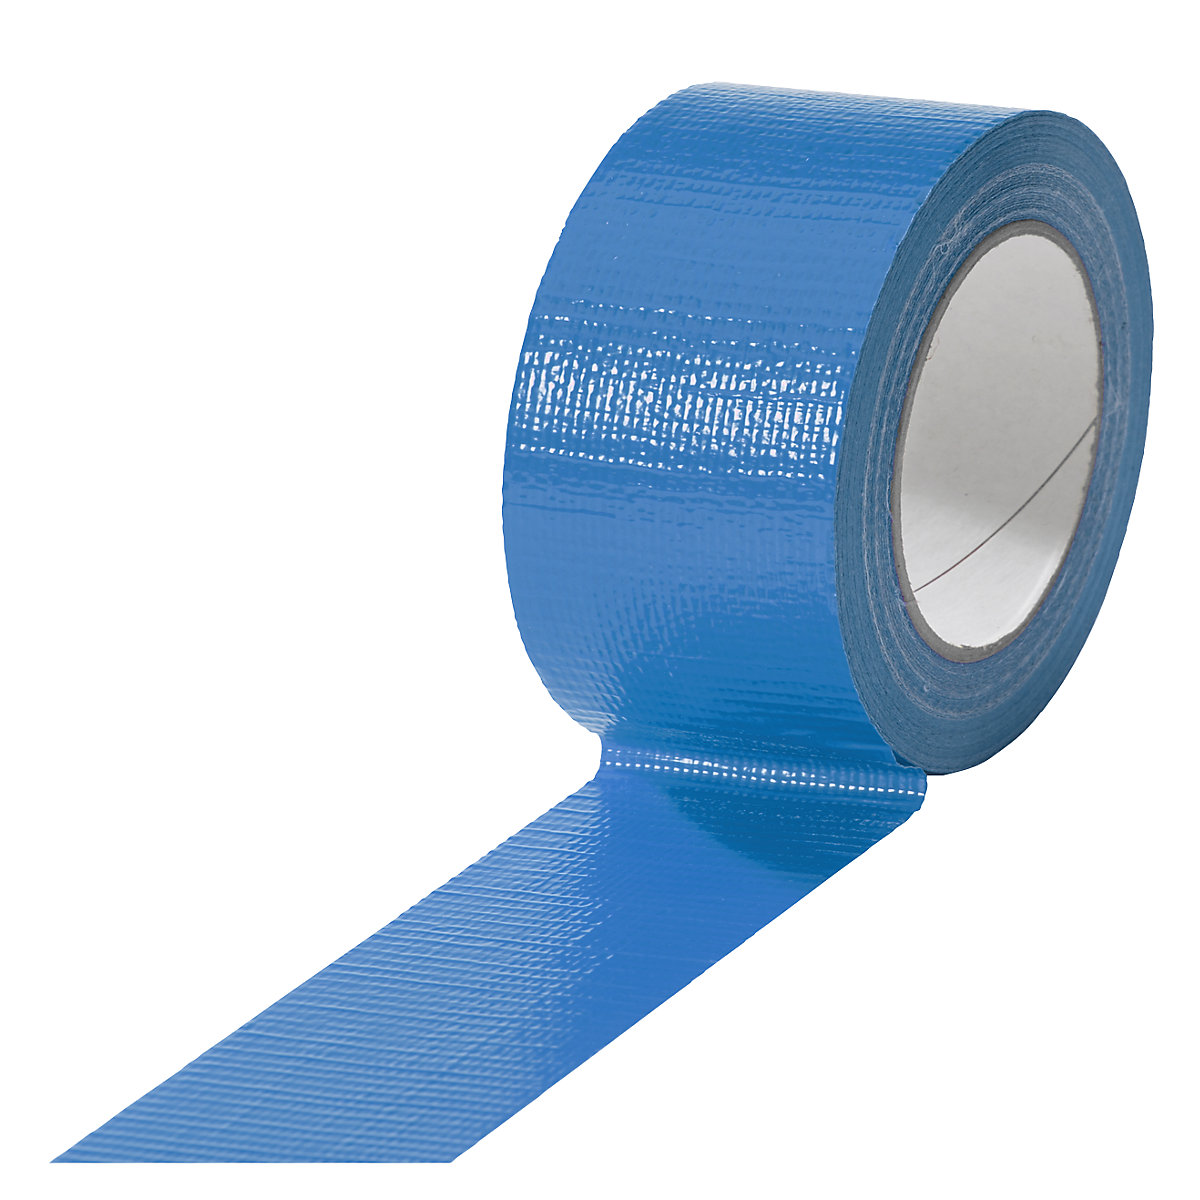 Fabric tape, in different colours, pack of 18 rolls, blue, tape width 50 mm-19